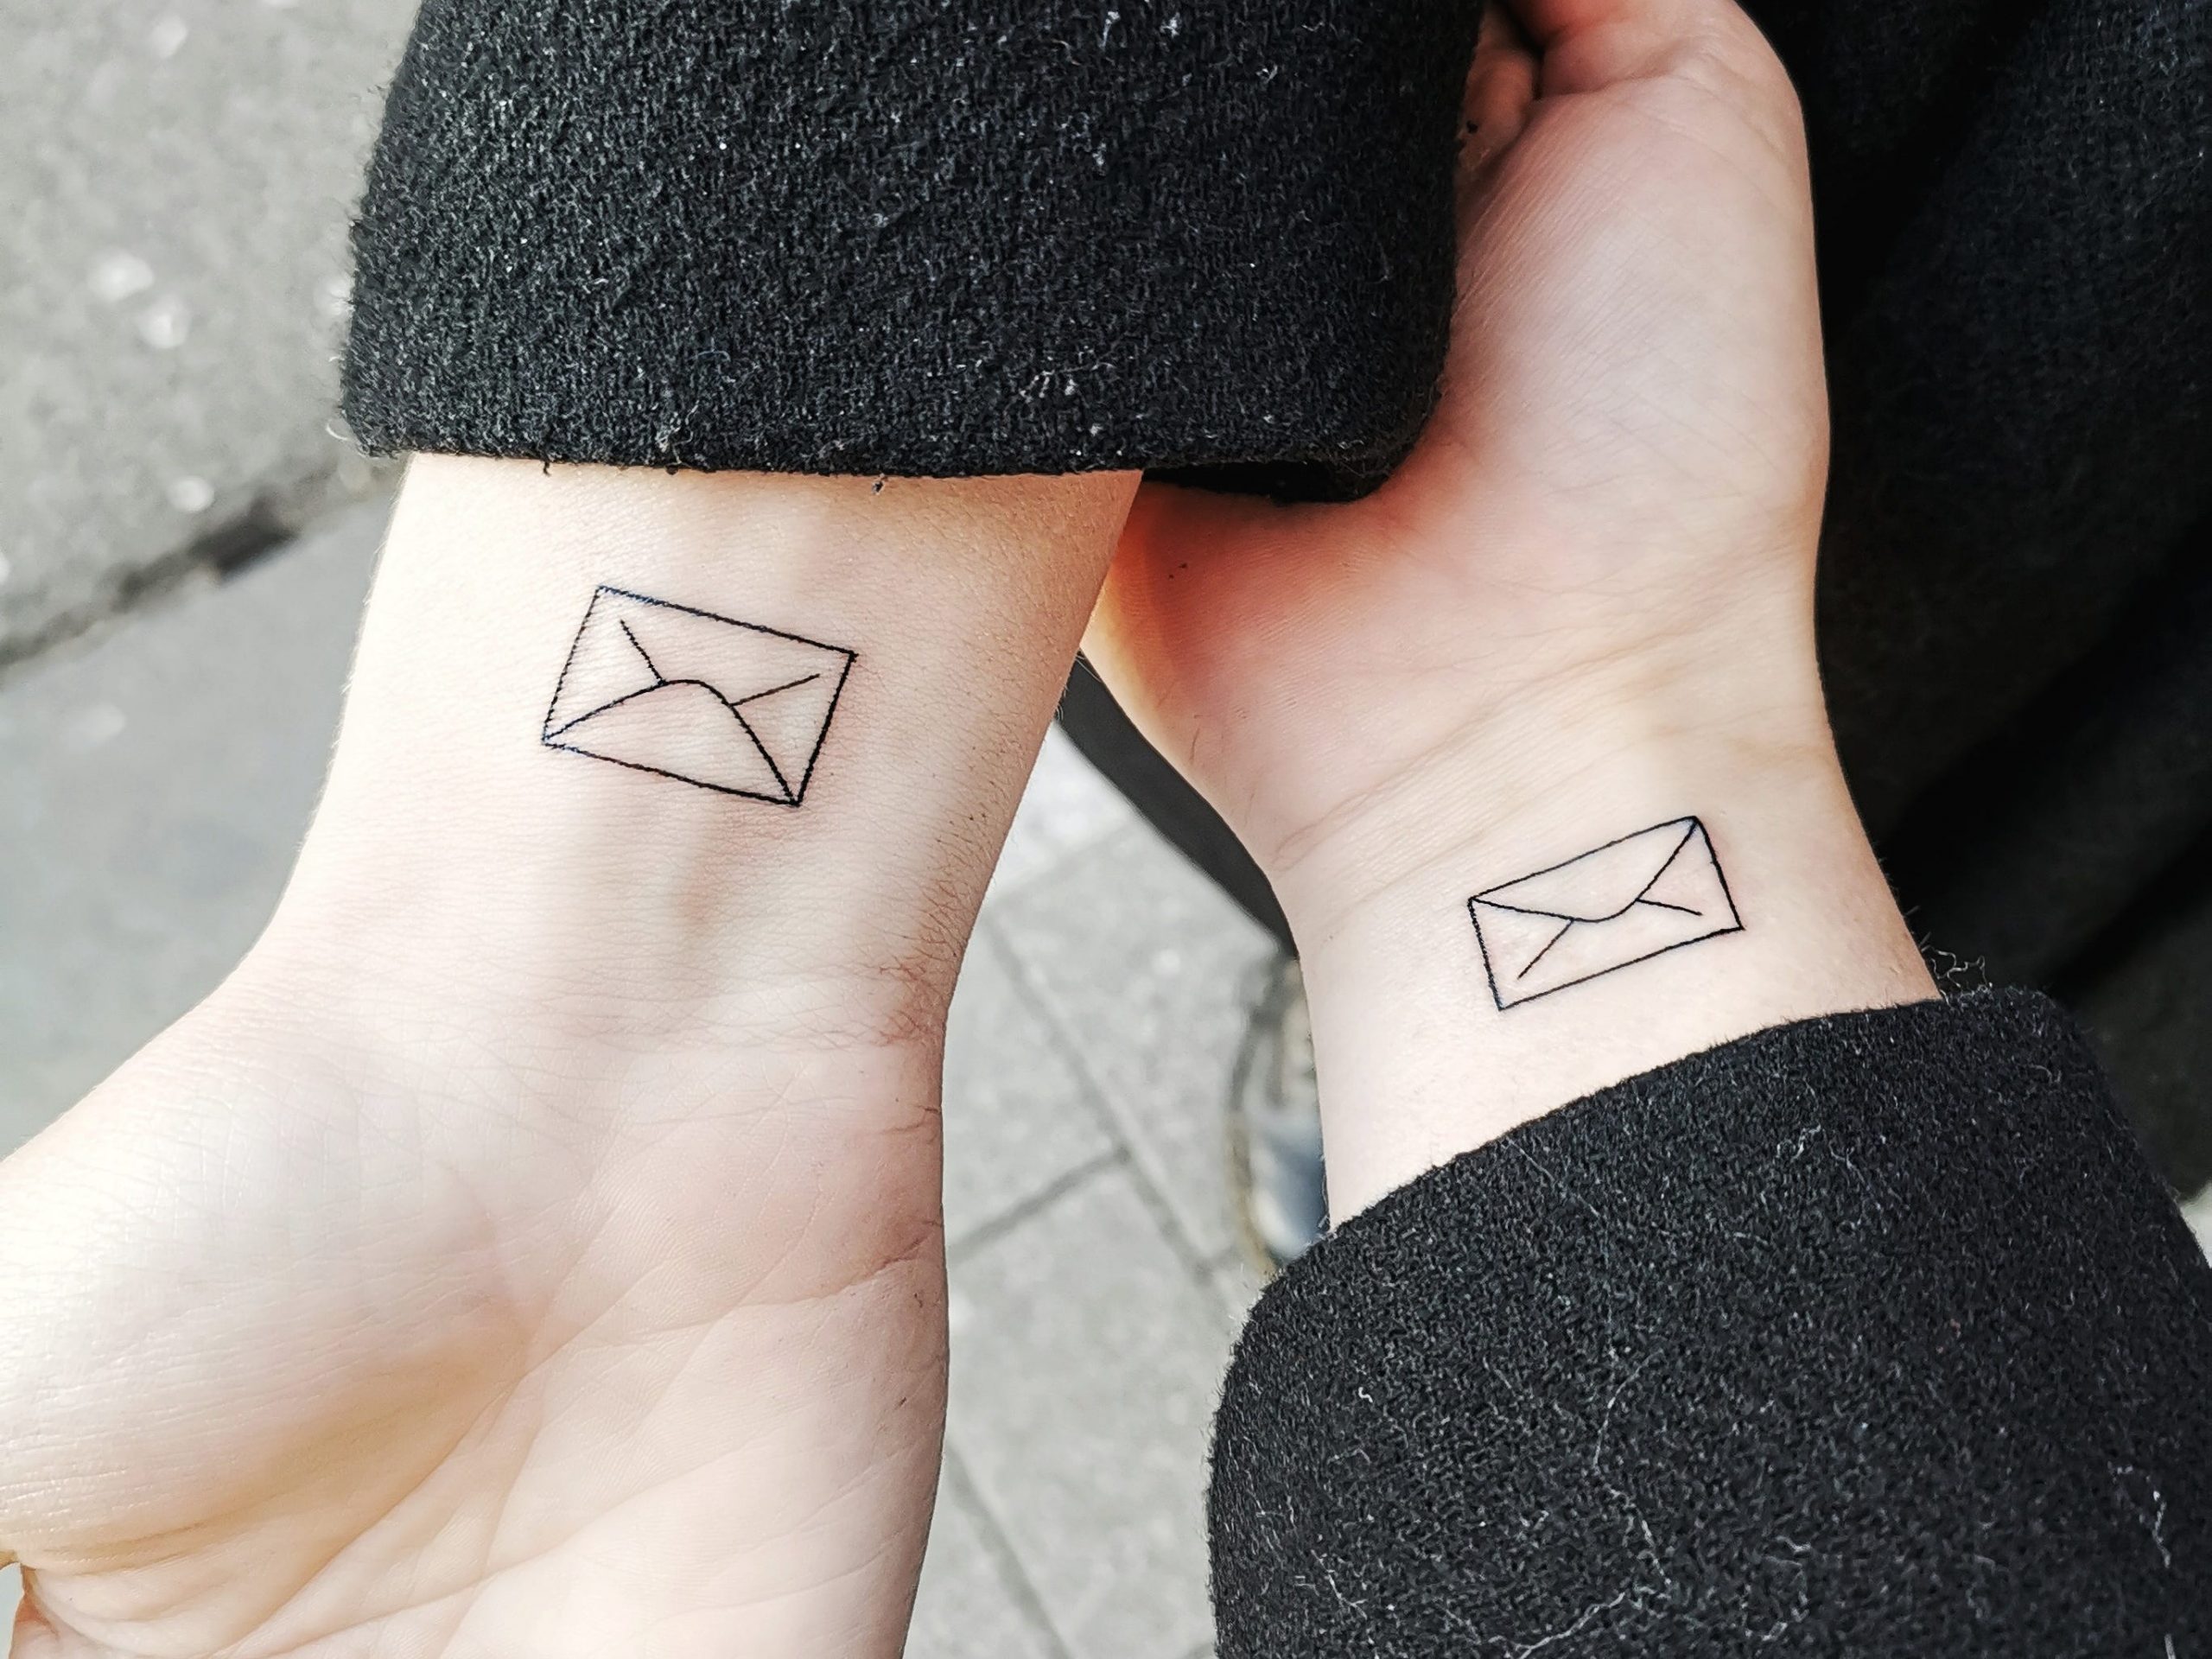 Tattoo artists share 10 mistakes people make when getting small tattoos